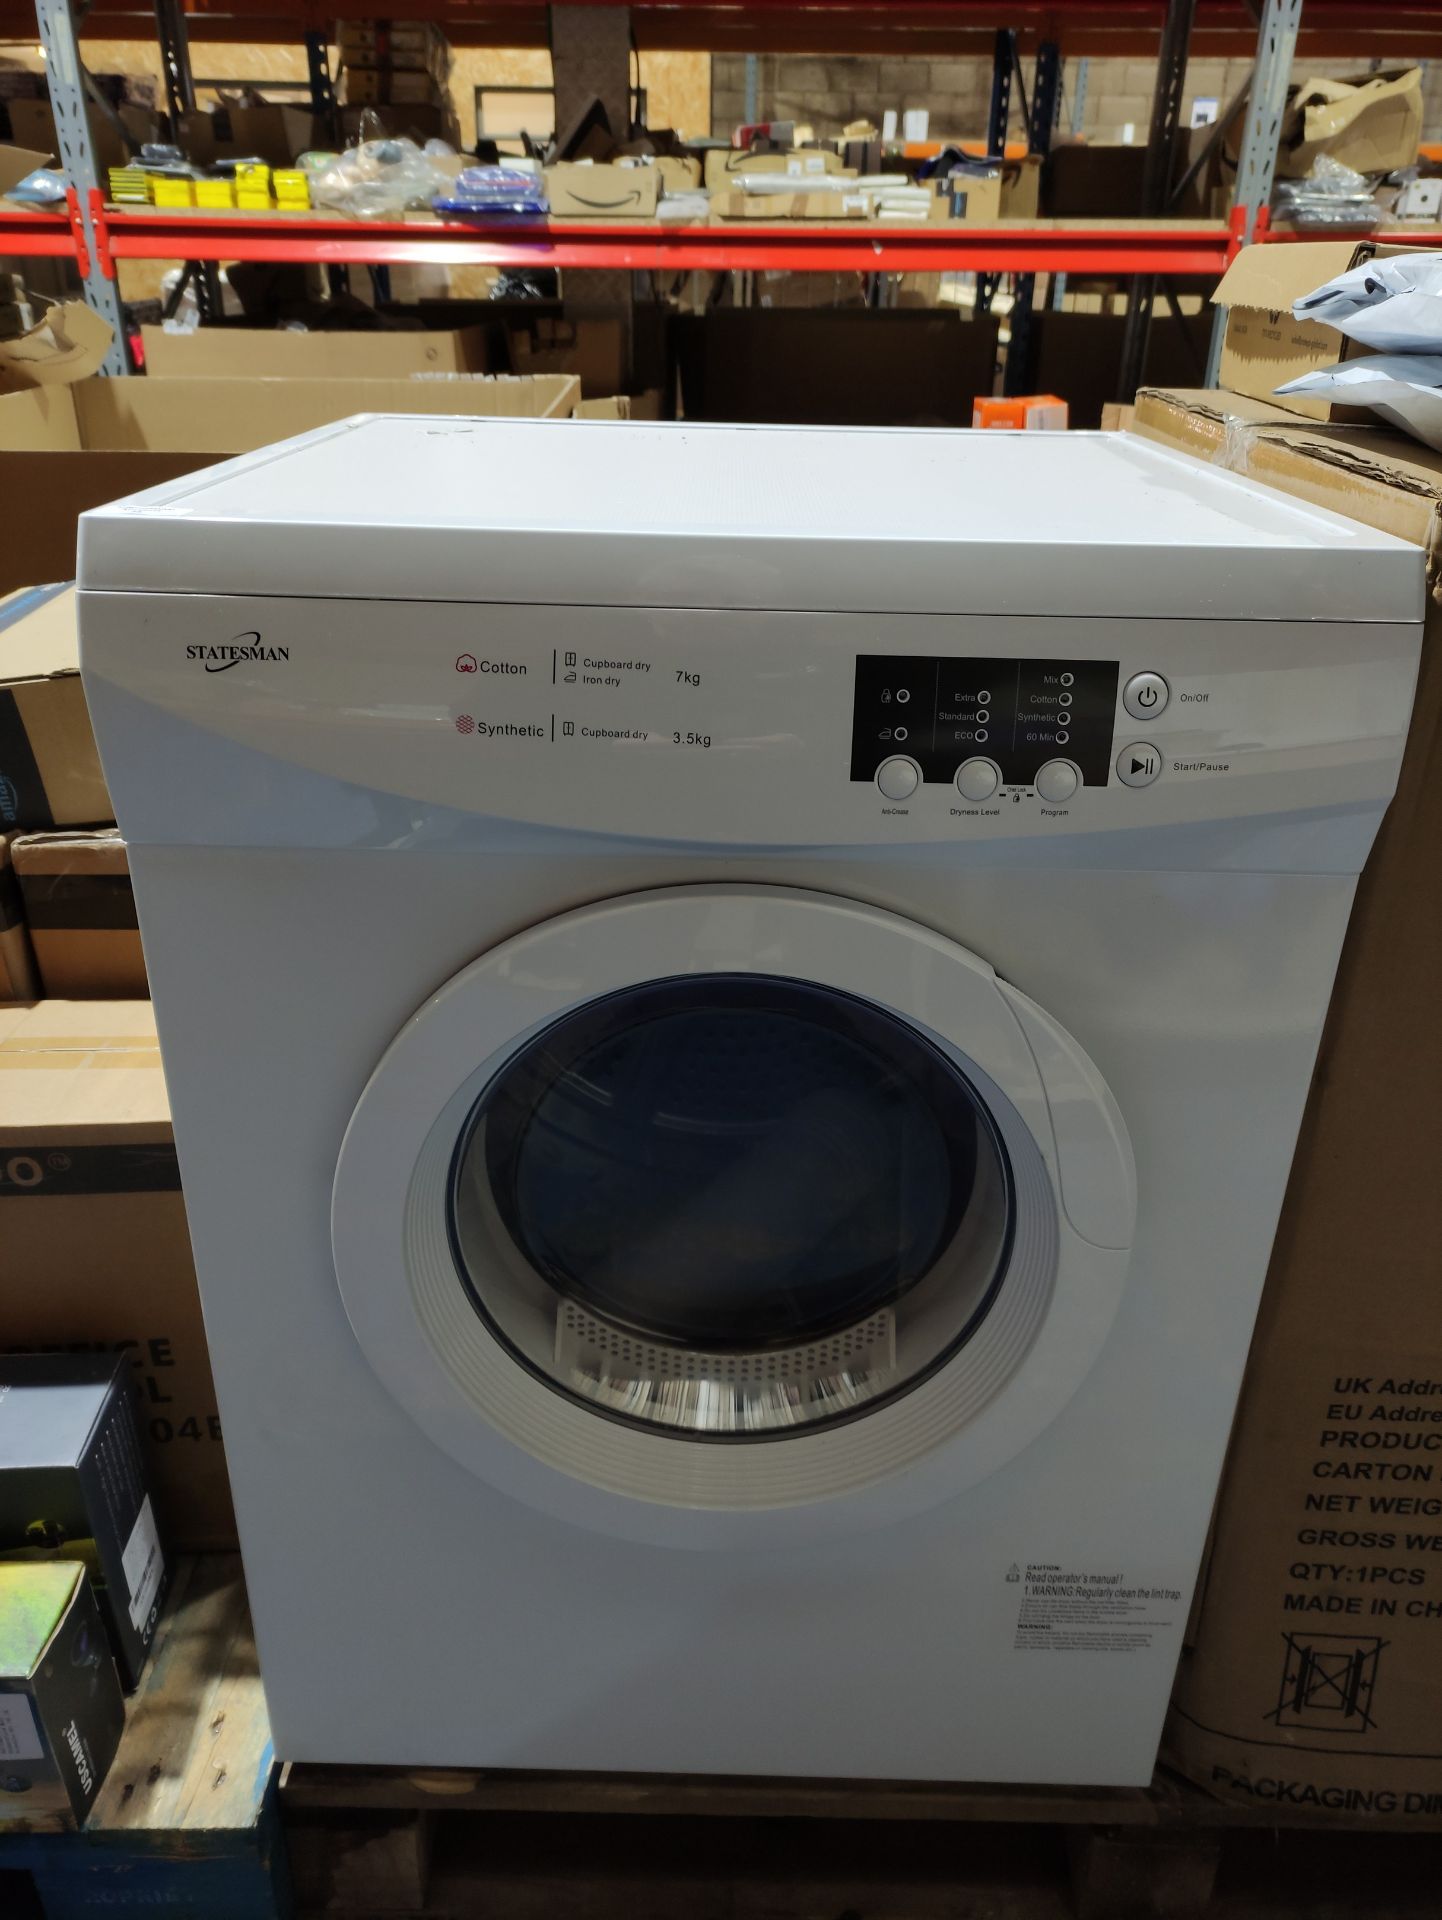 RRP £249.98 Statesman TVM07W Vented Freestanding Tumble Dryer - Image 2 of 2